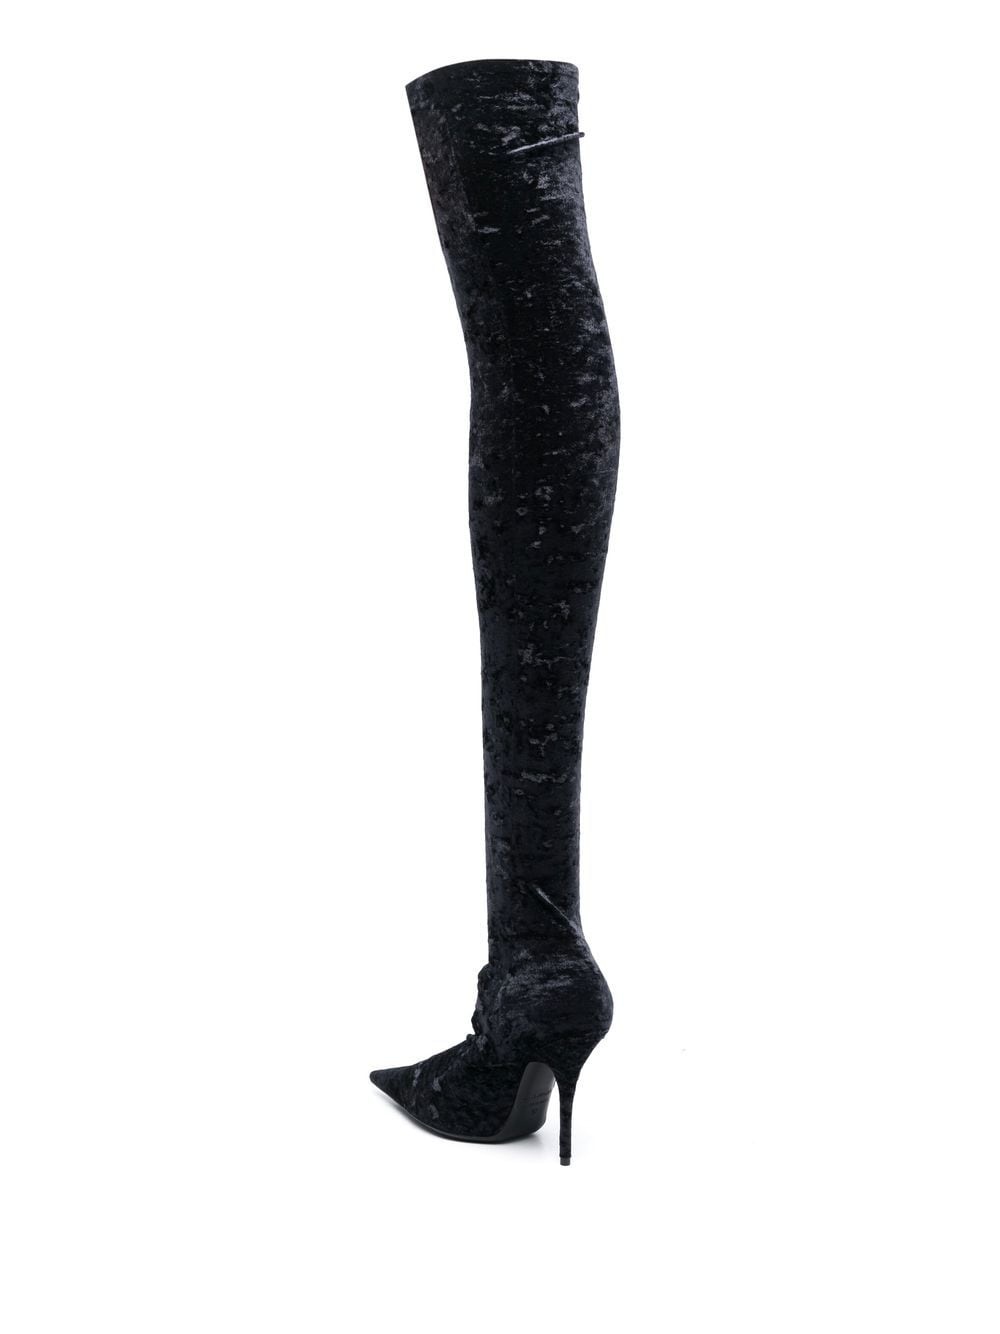 Knife thigh-high crushed velvet boots - 3